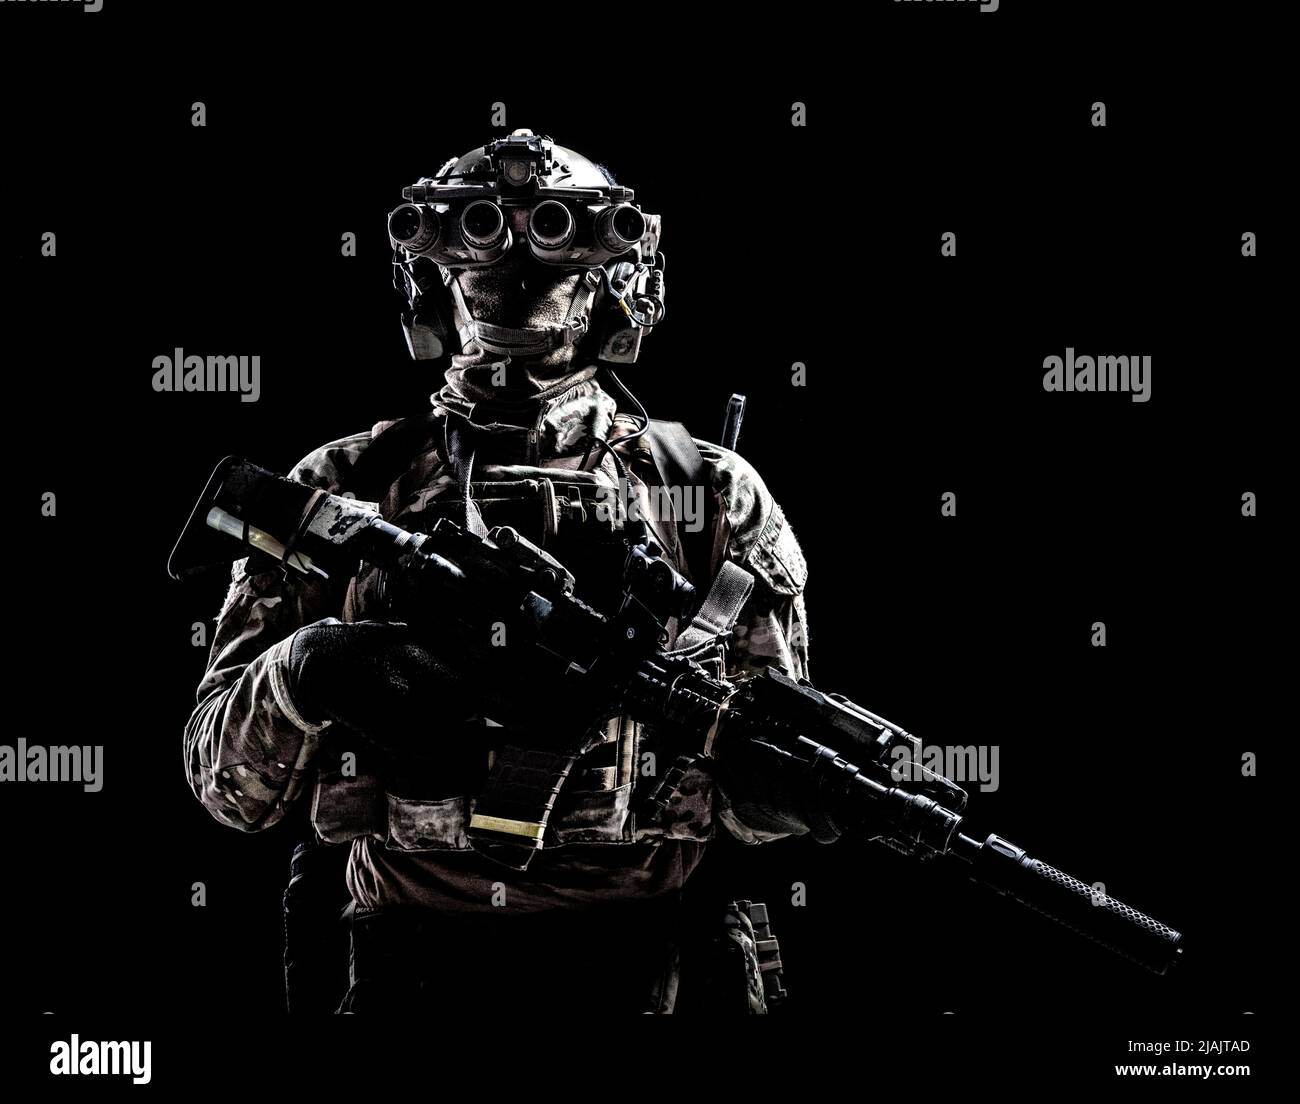 Special forces soldier standing in darkness equipped with night vision goggles and assault rifle. Stock Photo